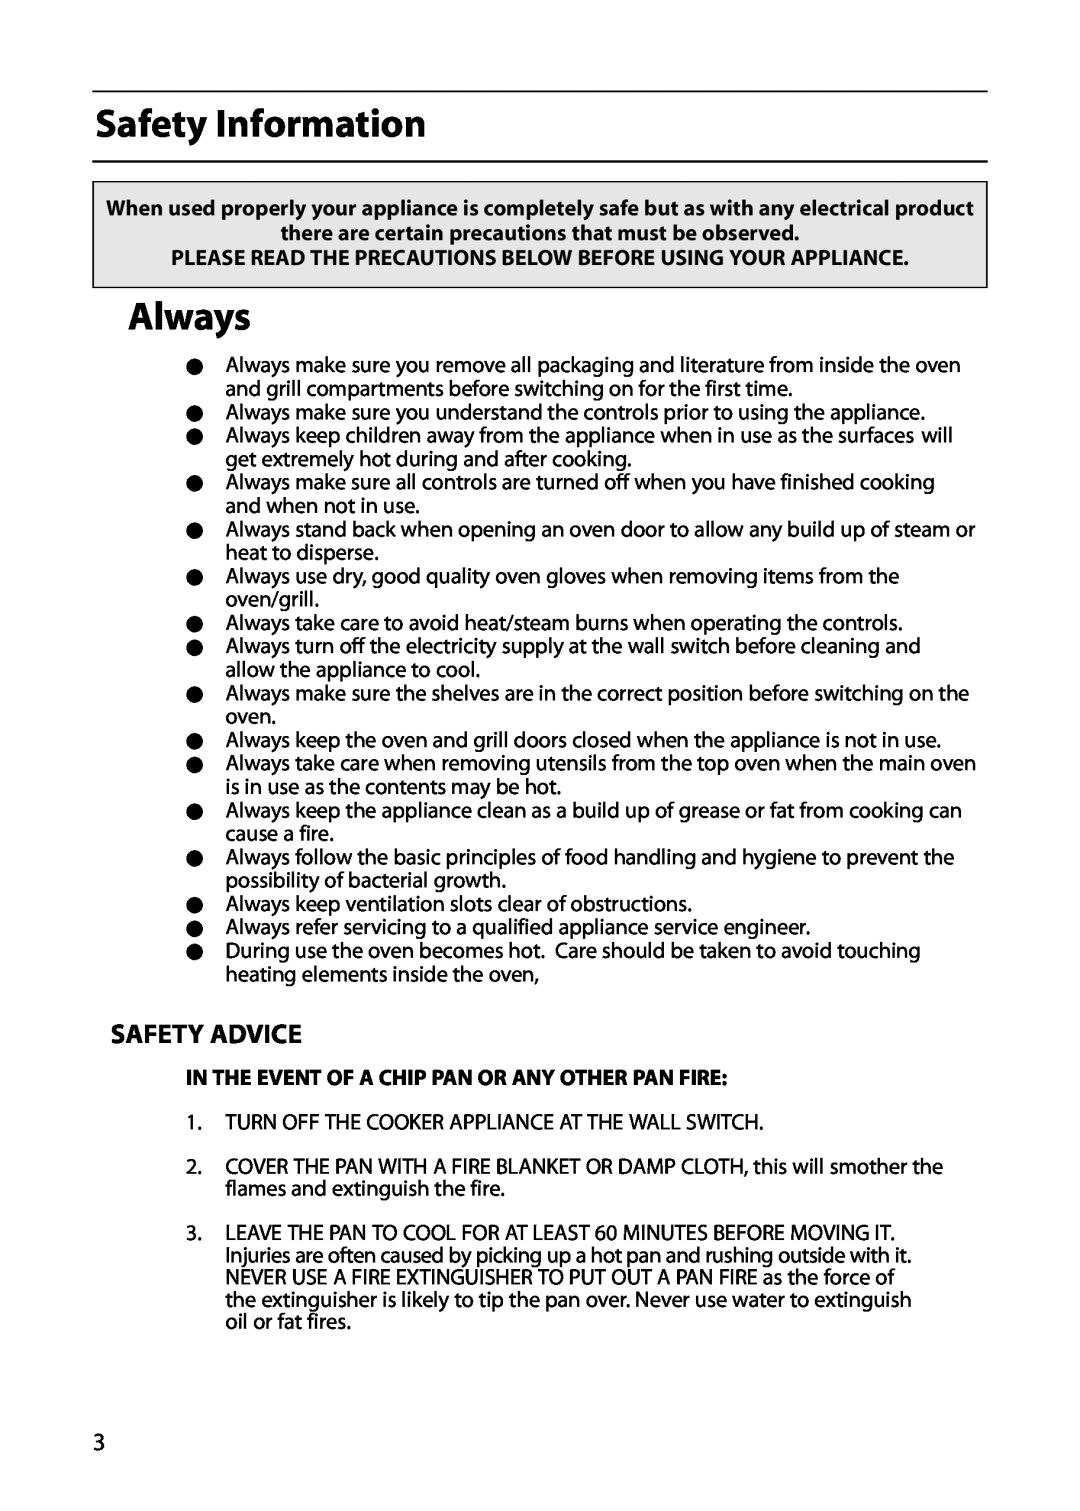 Hotpoint S220E manual Safety Information, Always, Safety Advice, In The Event Of A Chip Pan Or Any Other Pan Fire 